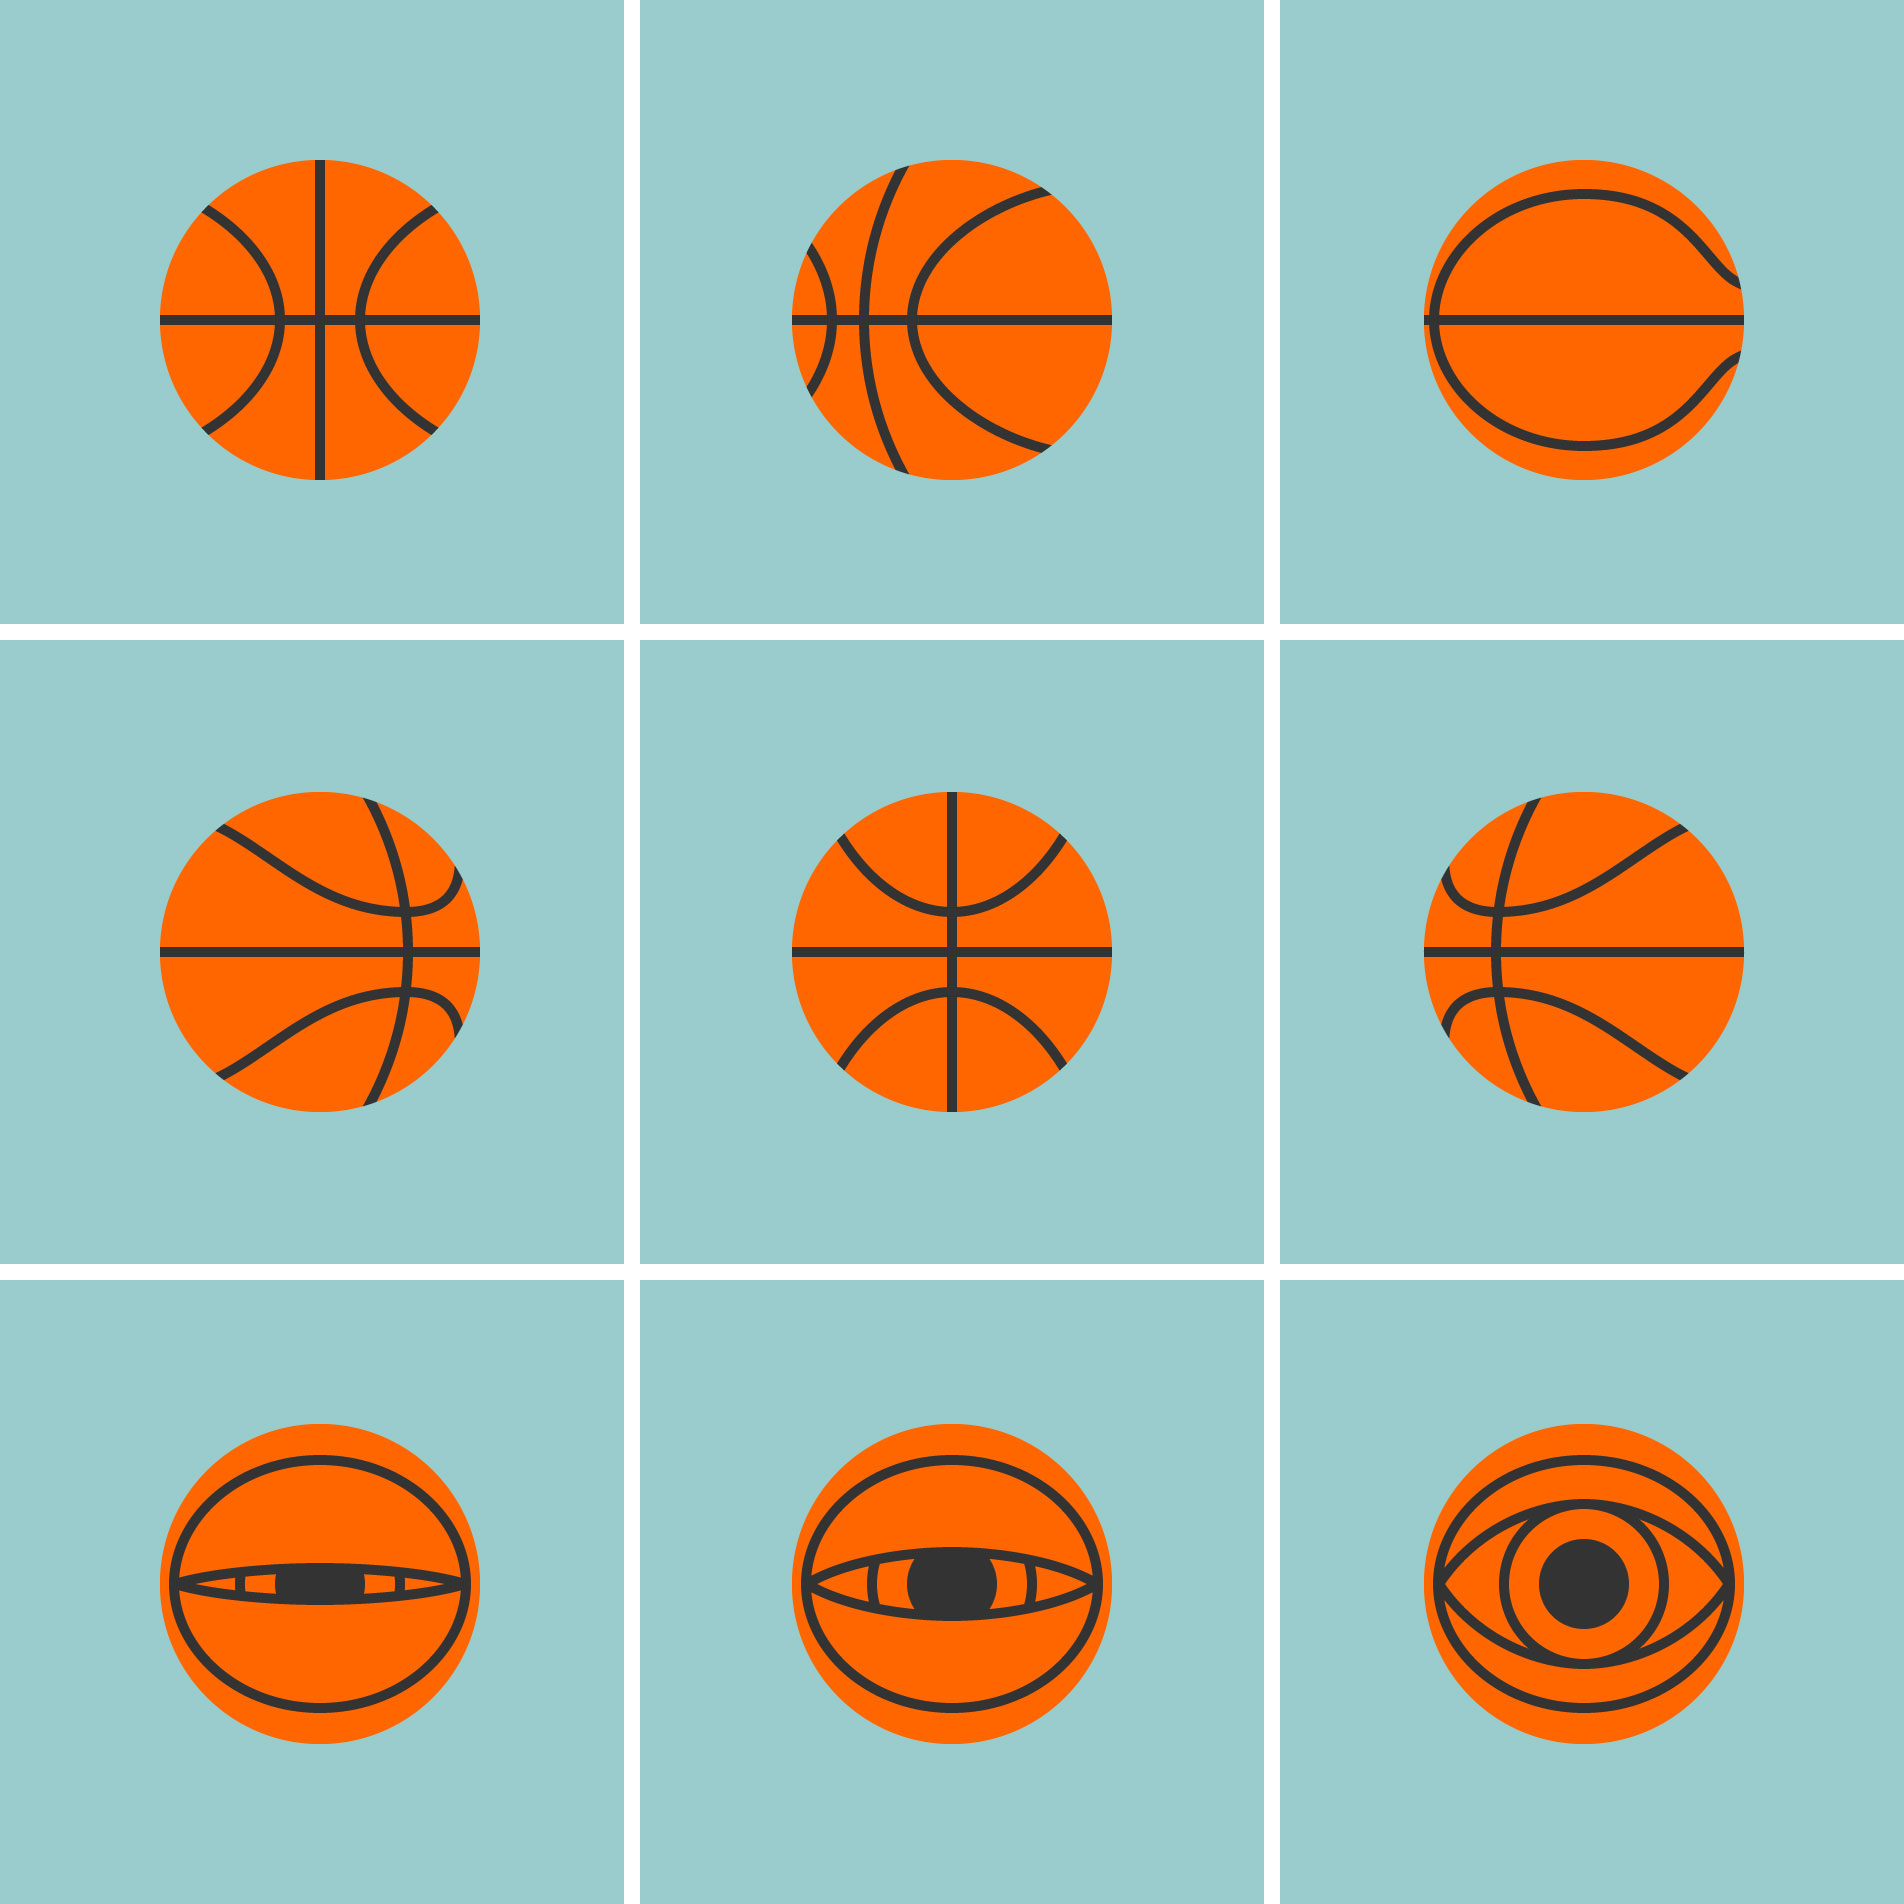 Illustration of a basketball rotating and then morphing into an open eye in 9 stages